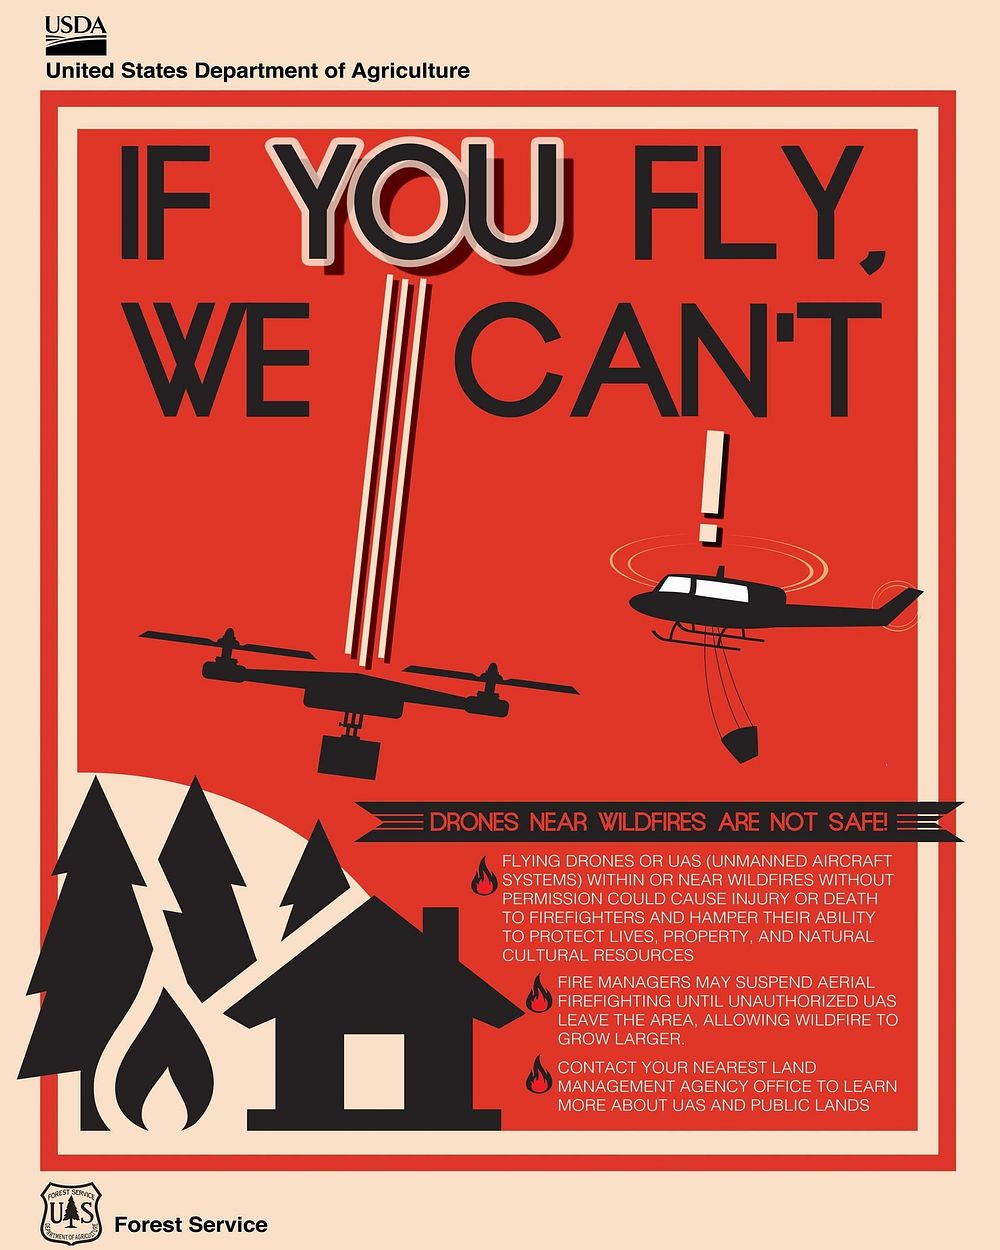 US Department of Agriculture poster warning about the risks of flying drones near wildfires